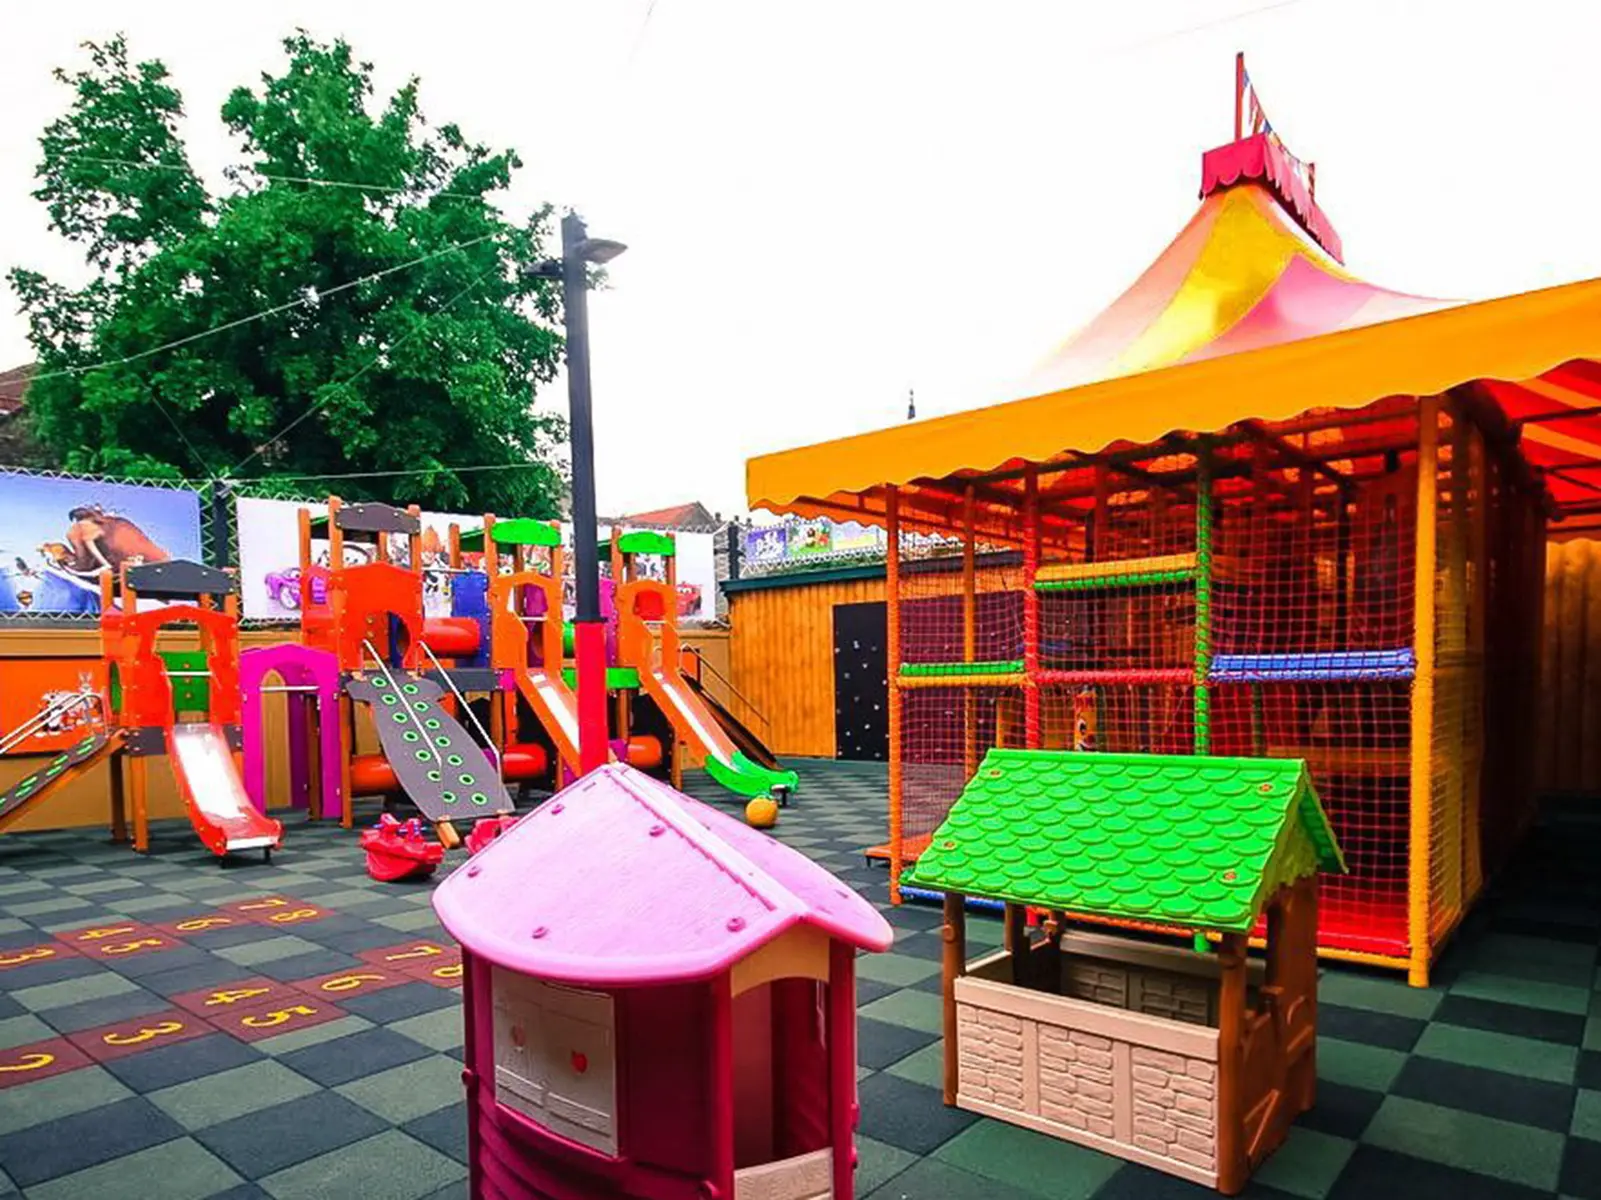 Outdoor play area equipment from European factory